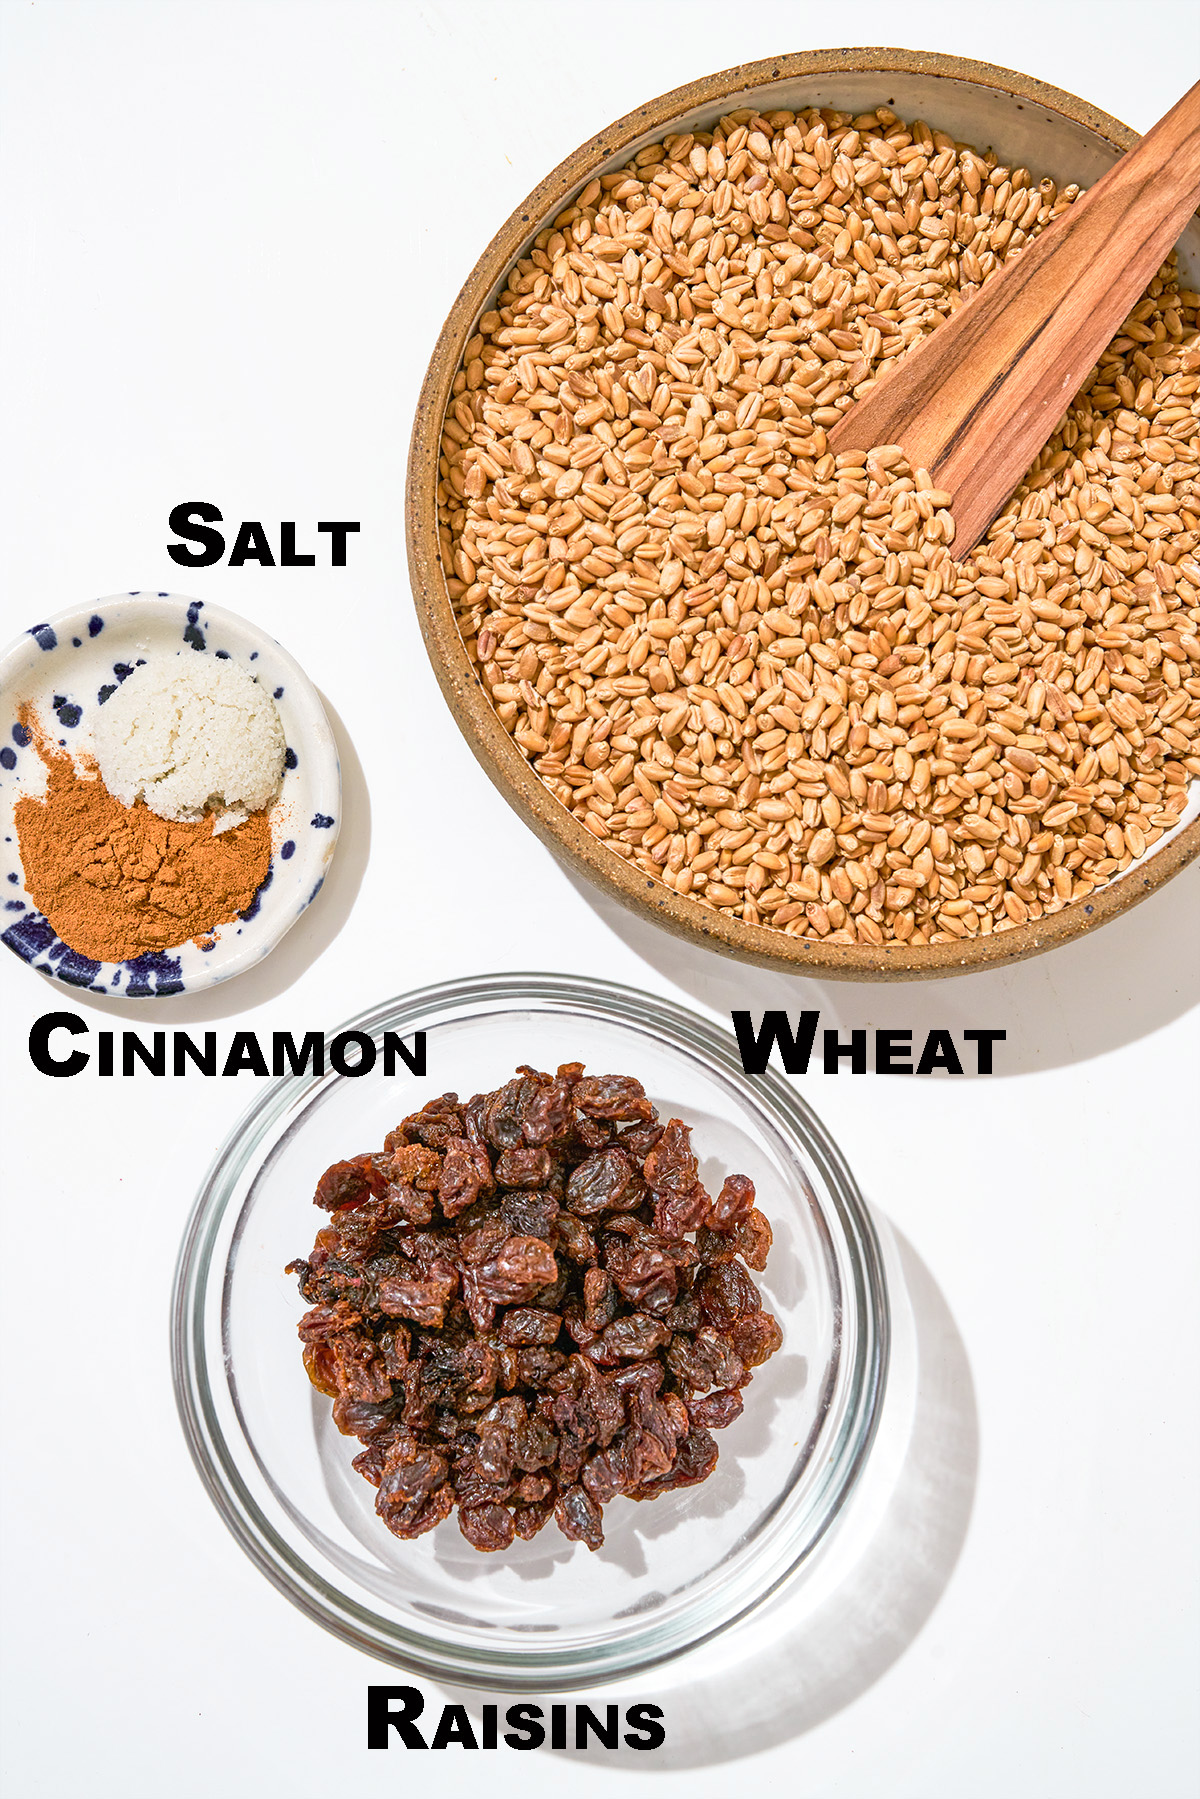 Sprouted bread ingredients with labels.